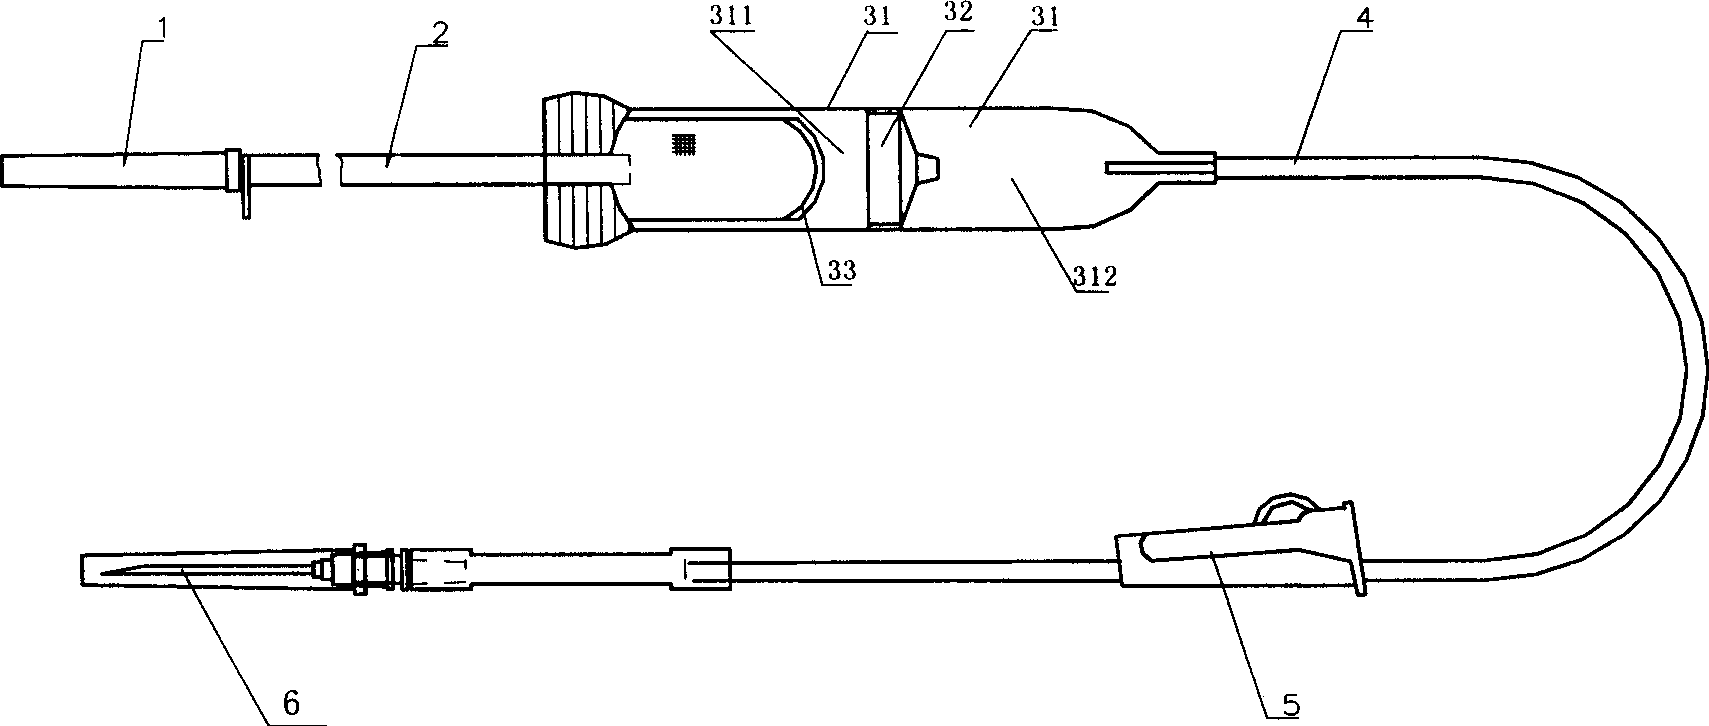 Double-cavity drop funnel blood transfusion device